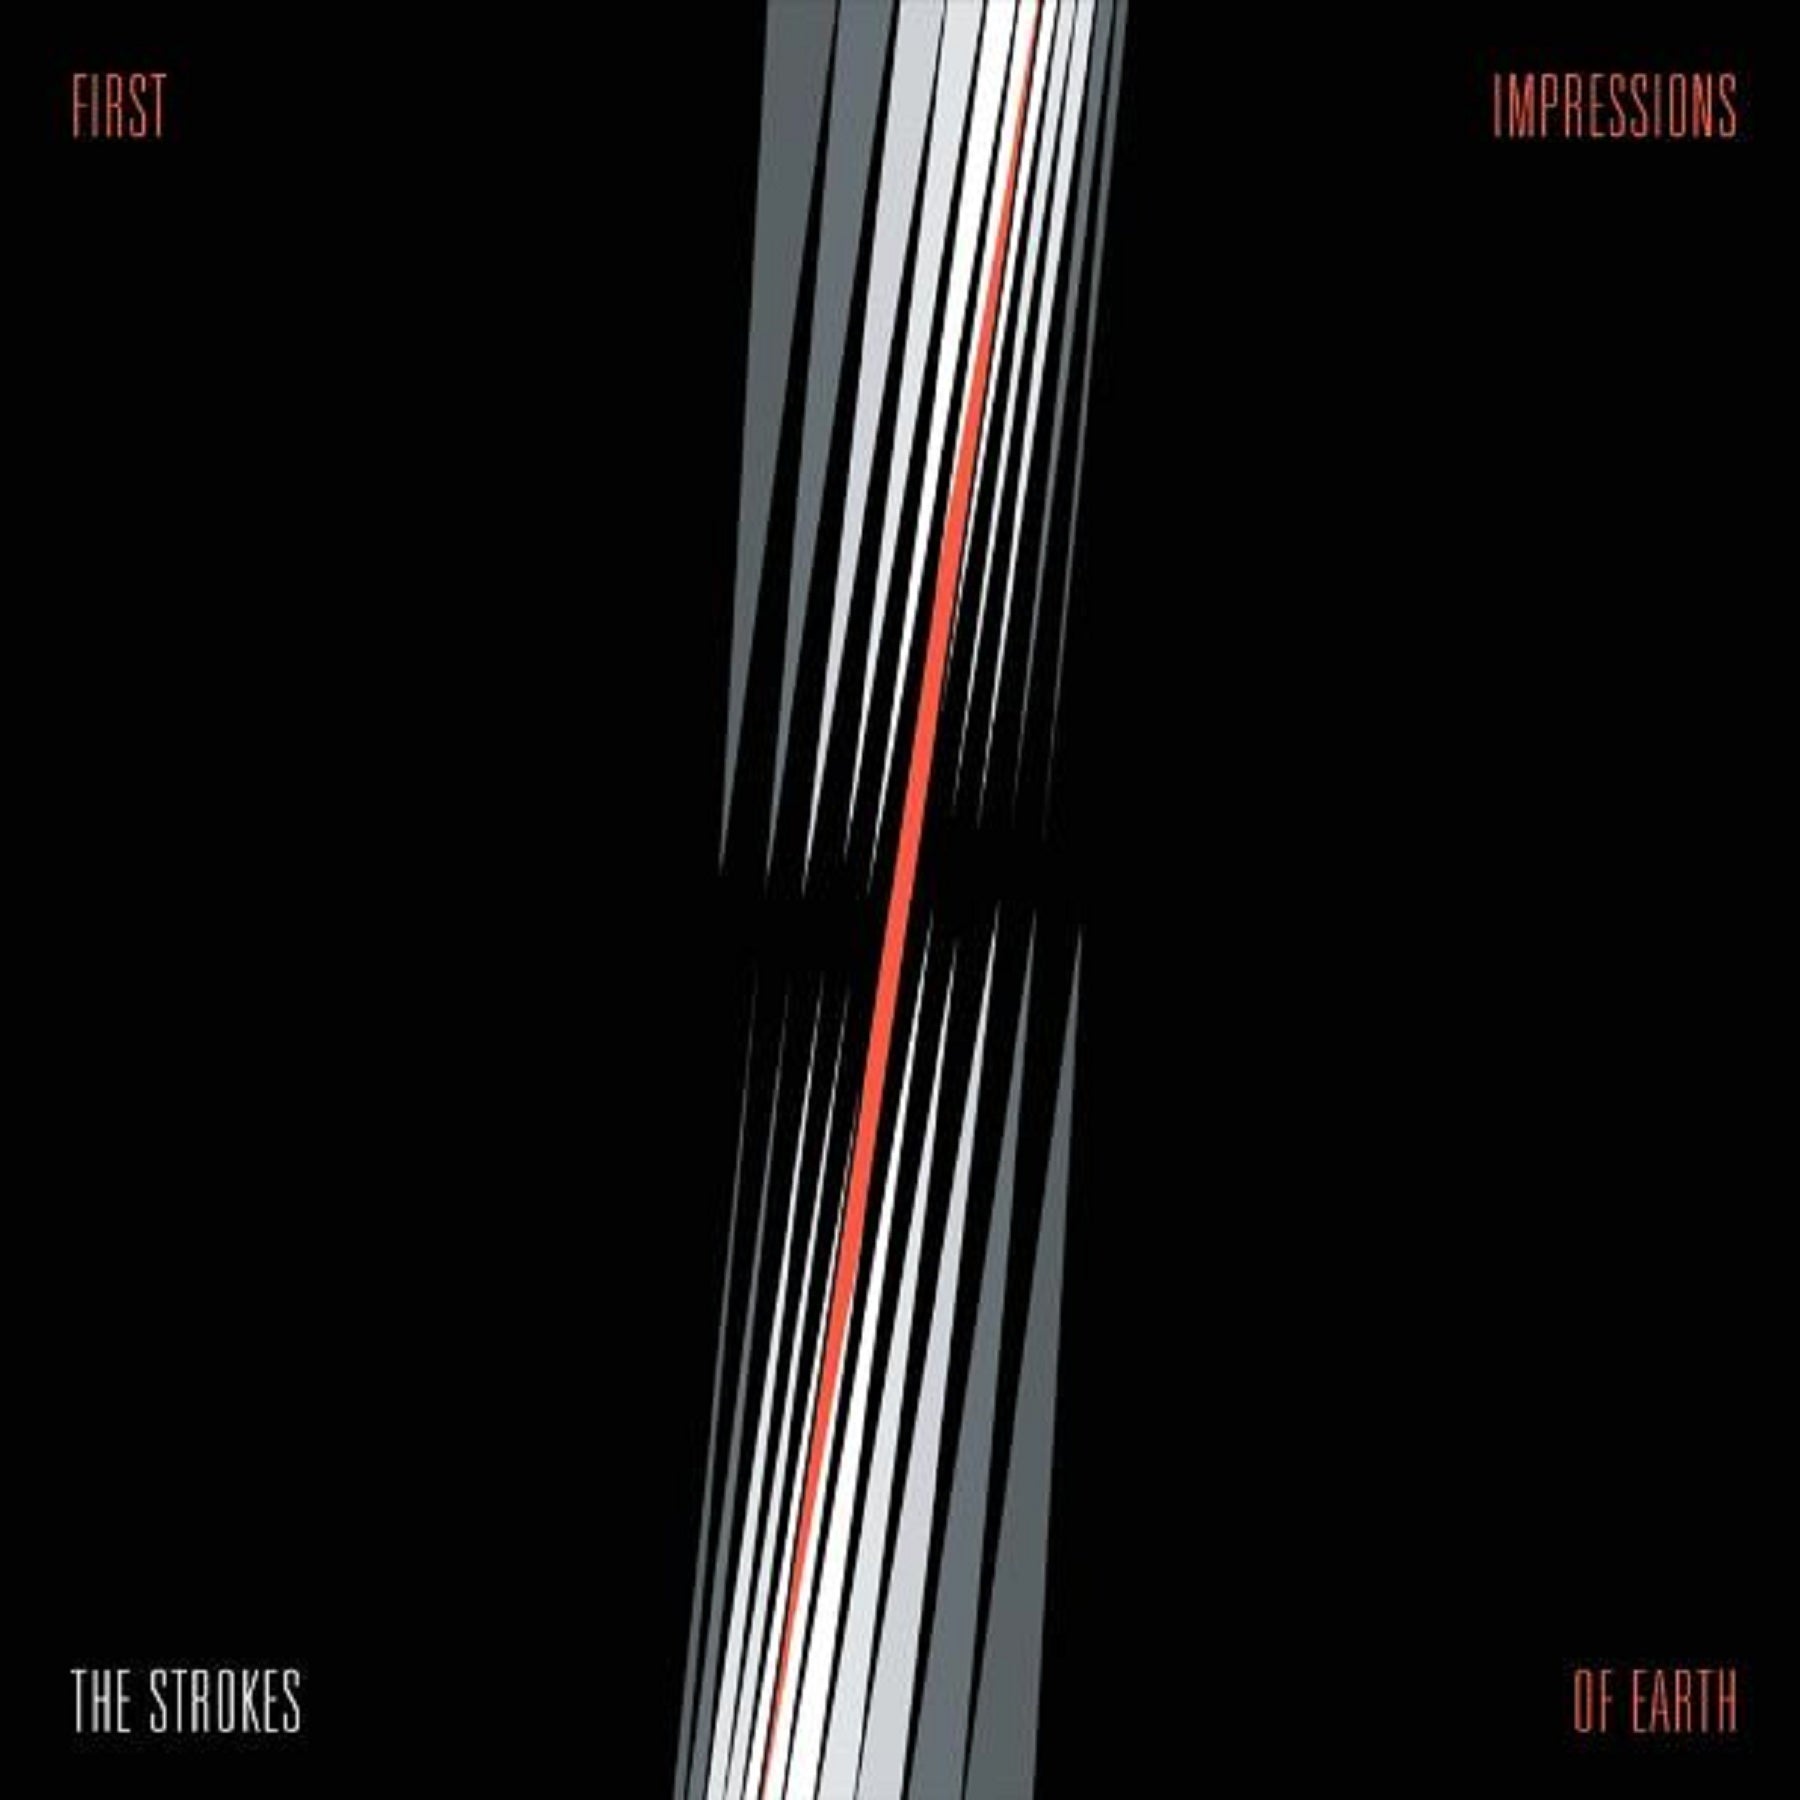 The Strokes - First Impressions of Earth - BROKEN 8 RECORDS